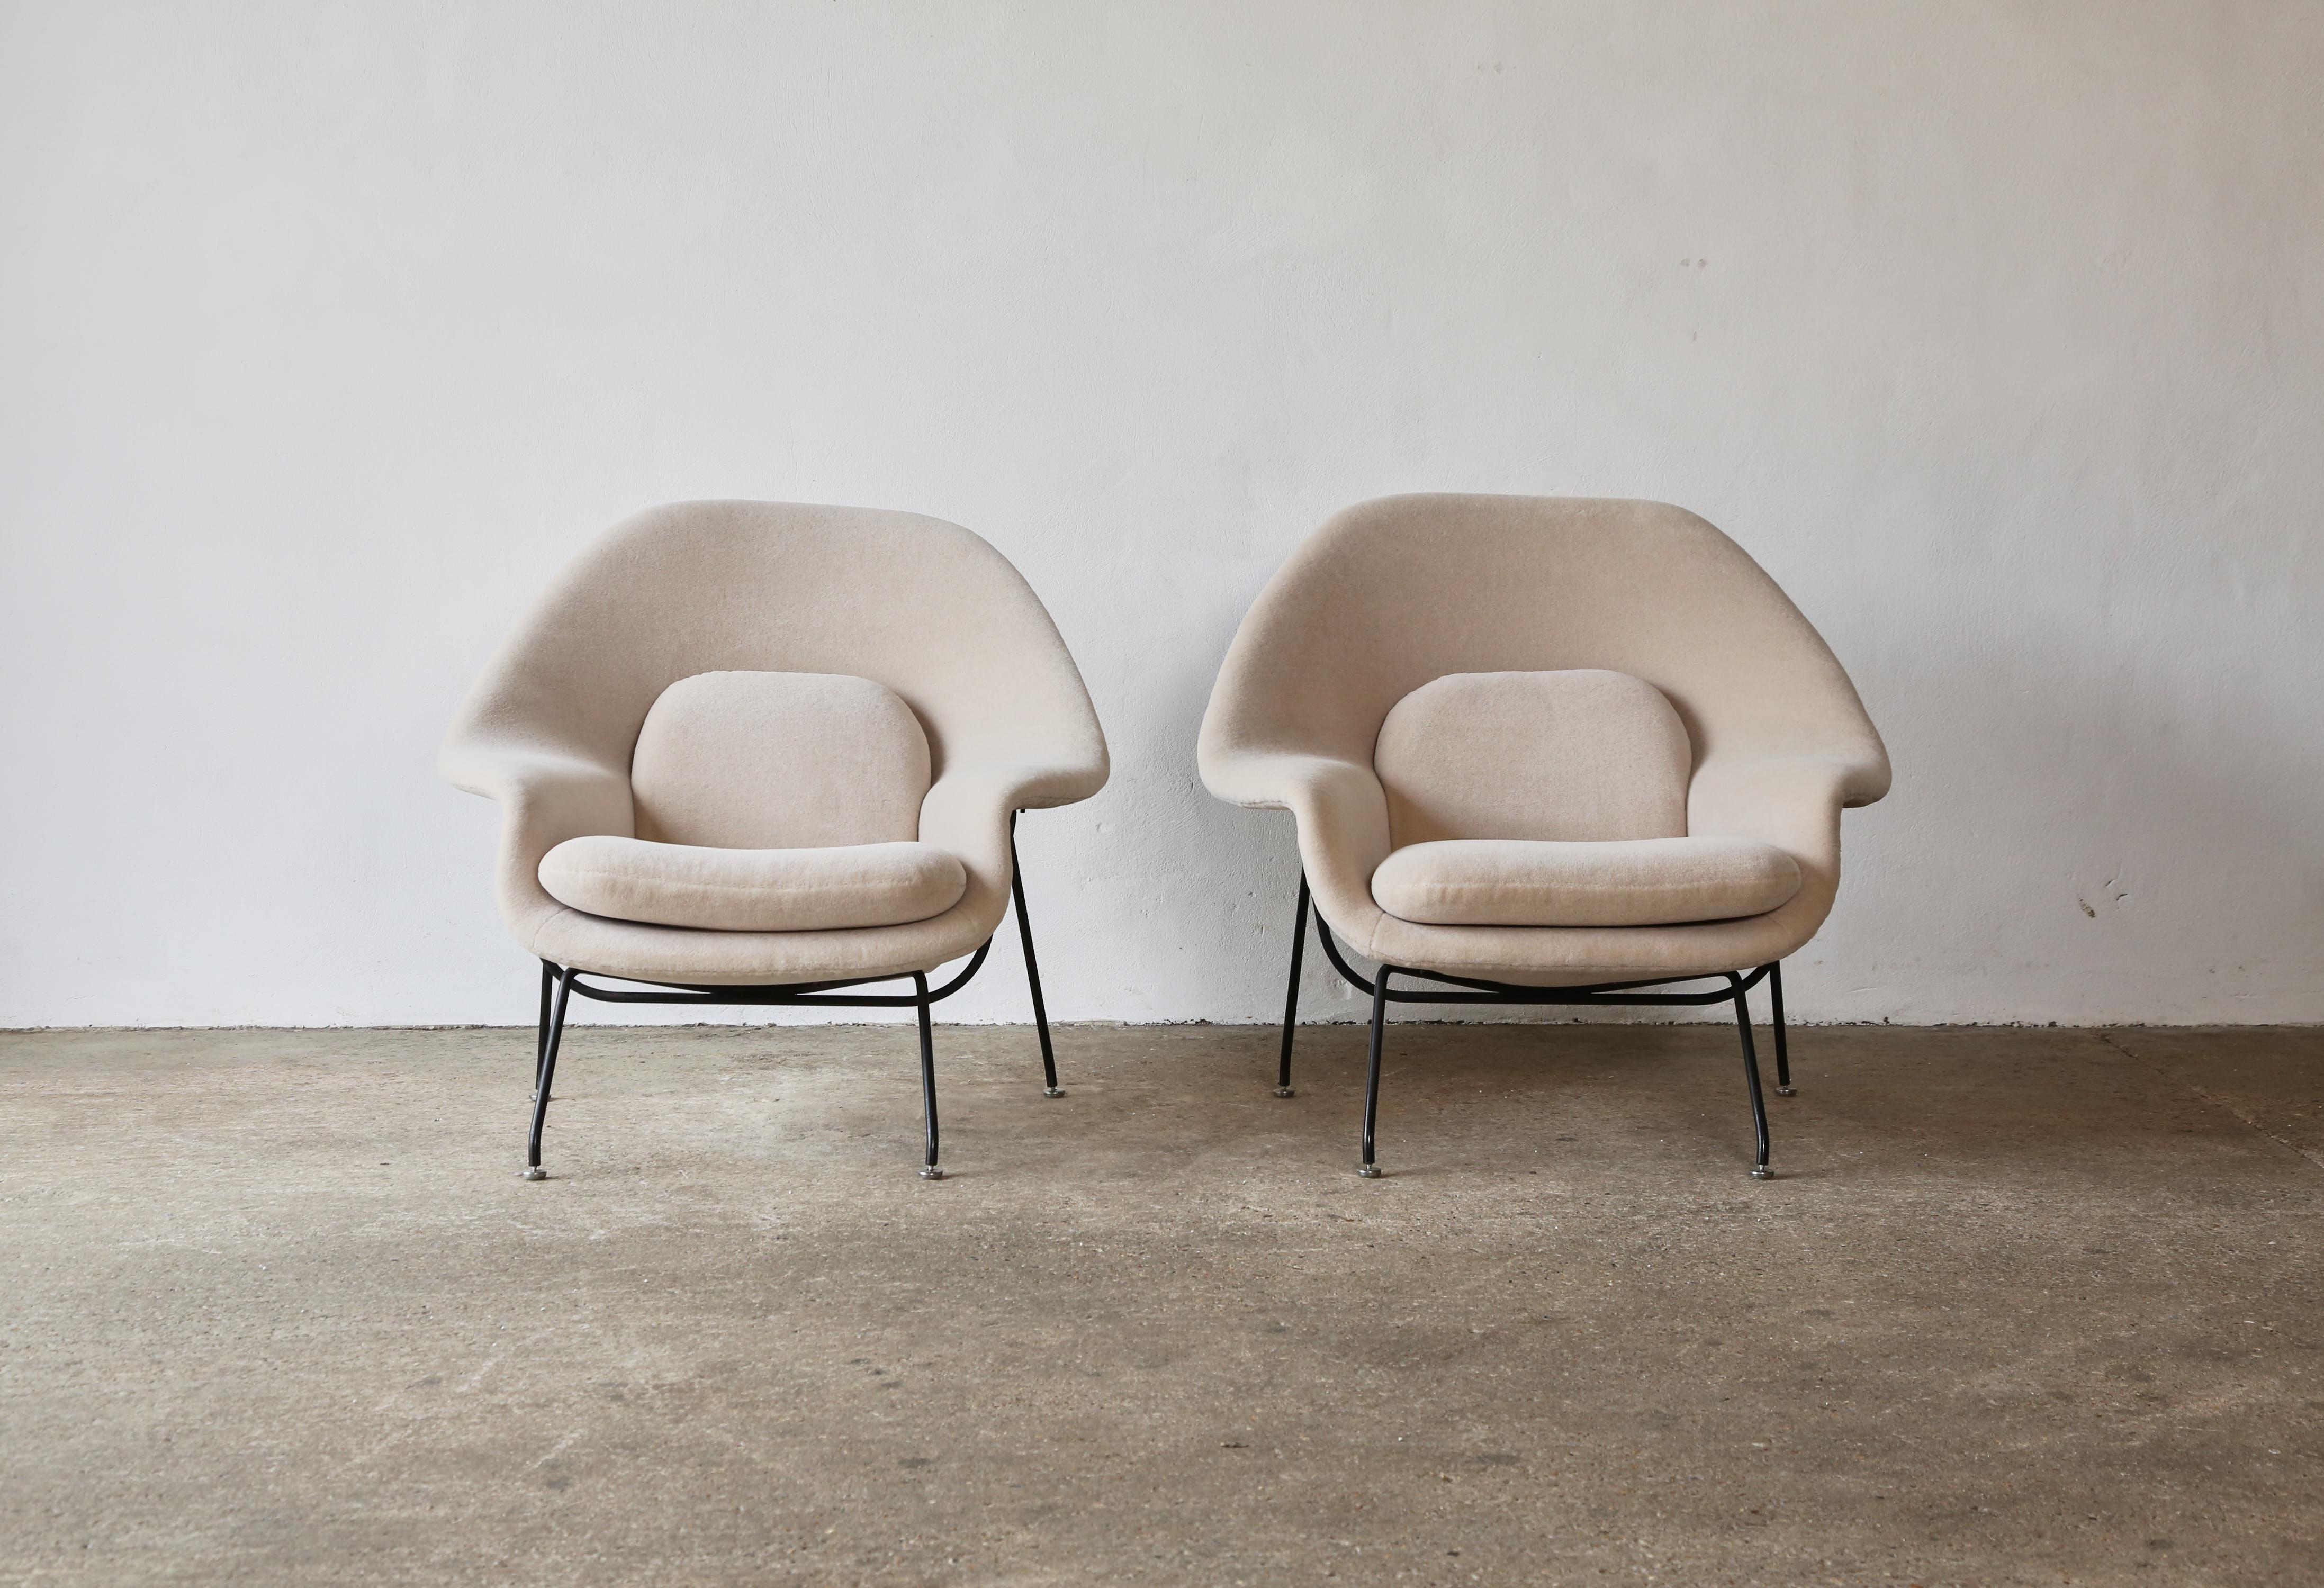 American Rare Early Pair of Eero Saarinen Womb Chairs and Ottomans, Knoll, USA, 1950s For Sale